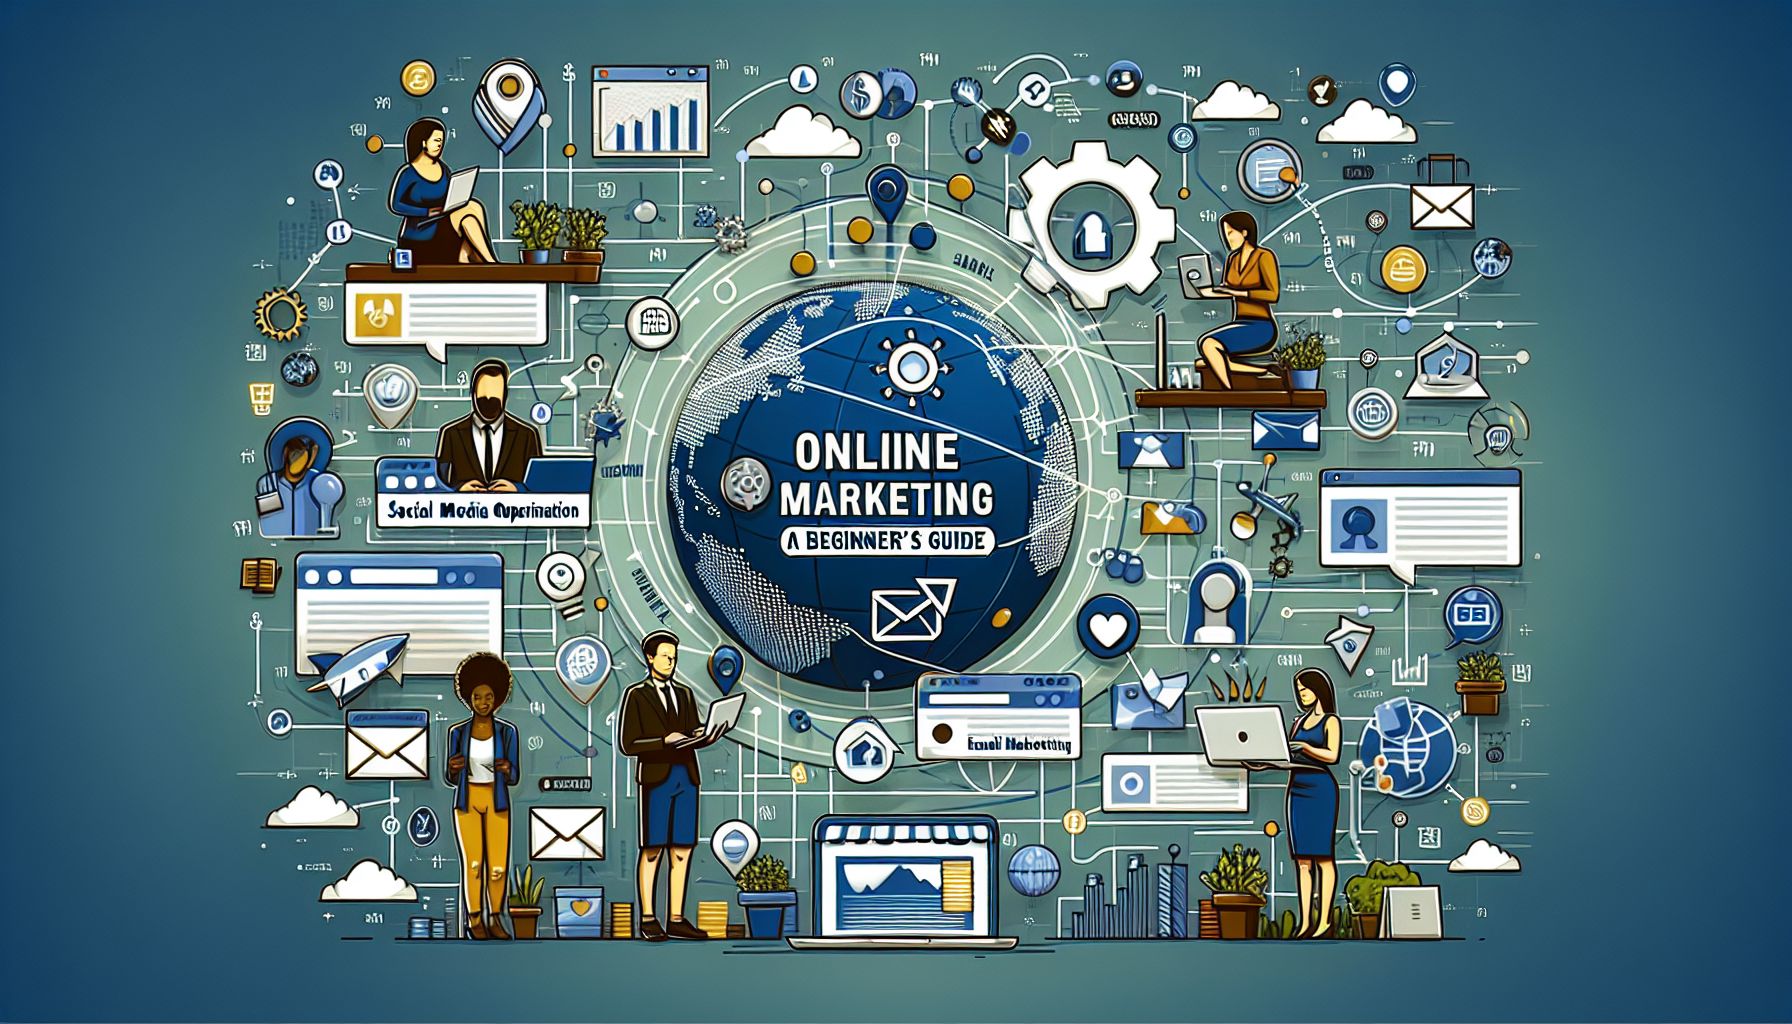 Online Marketing for Small Business Owners: A Beginner’s Guide